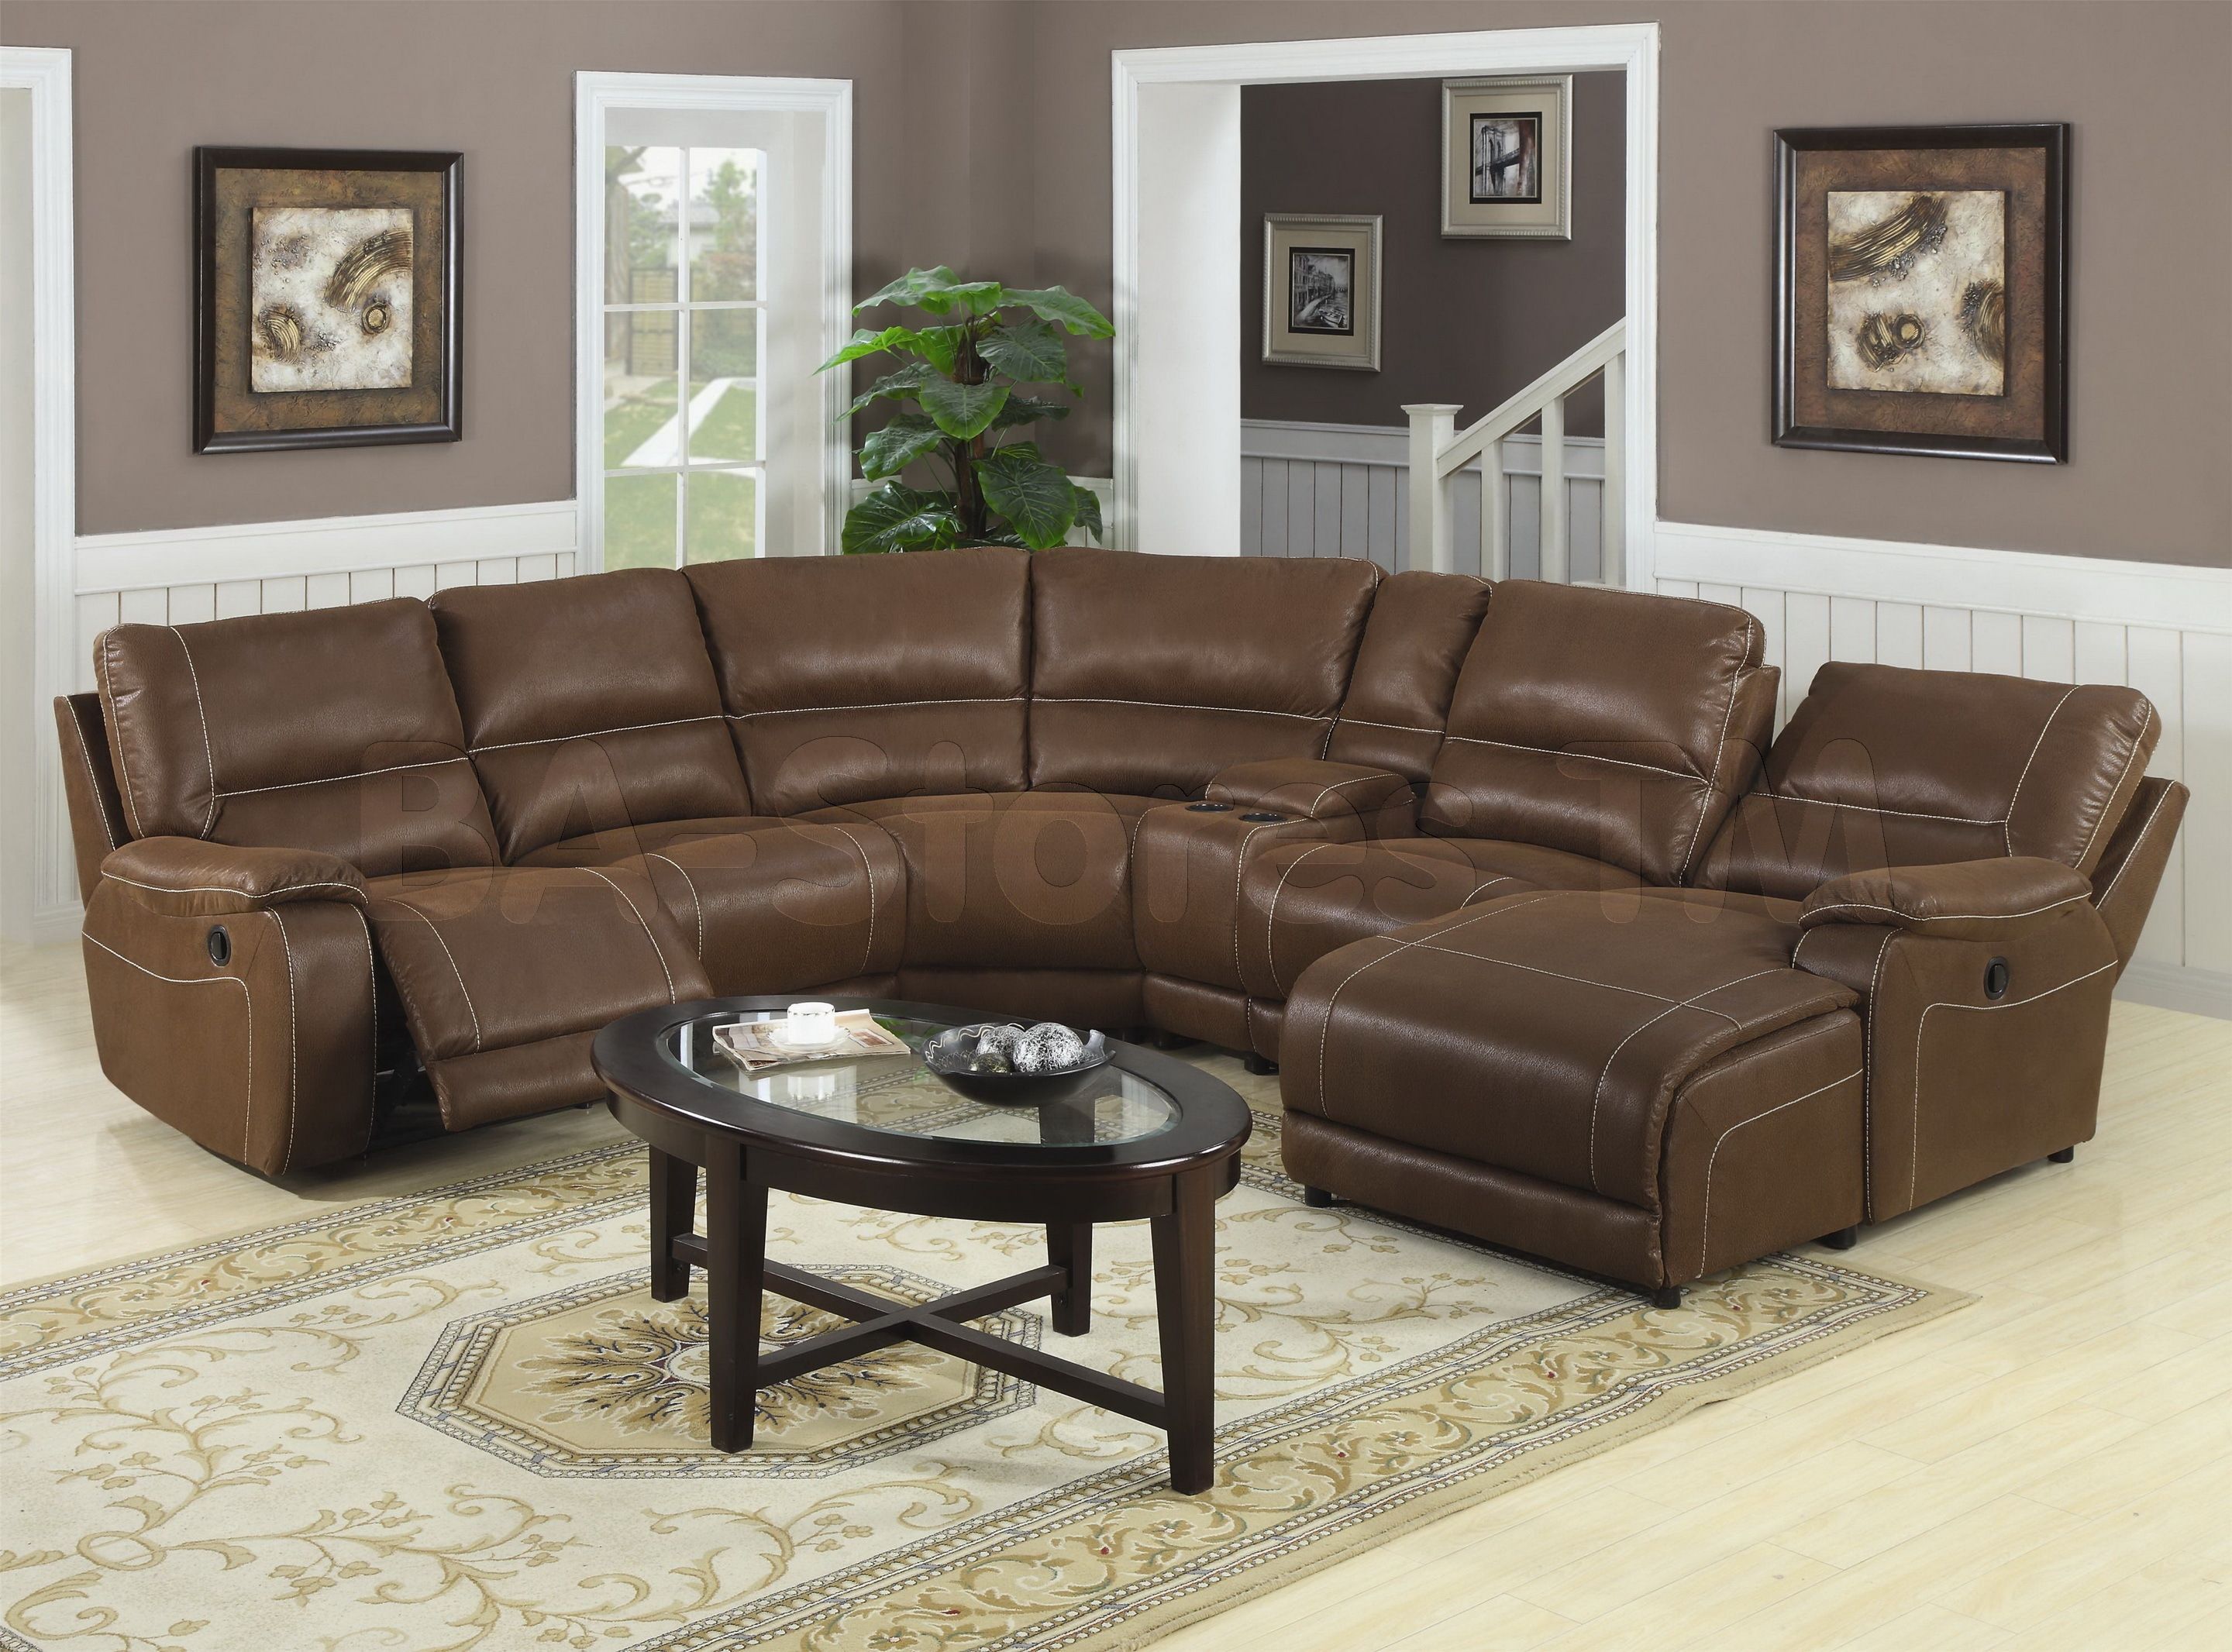 Curved Sectional Sofa With Recliner Cleanupflorida Regarding Curved Sectional Sofa With Recliner (View 4 of 12)